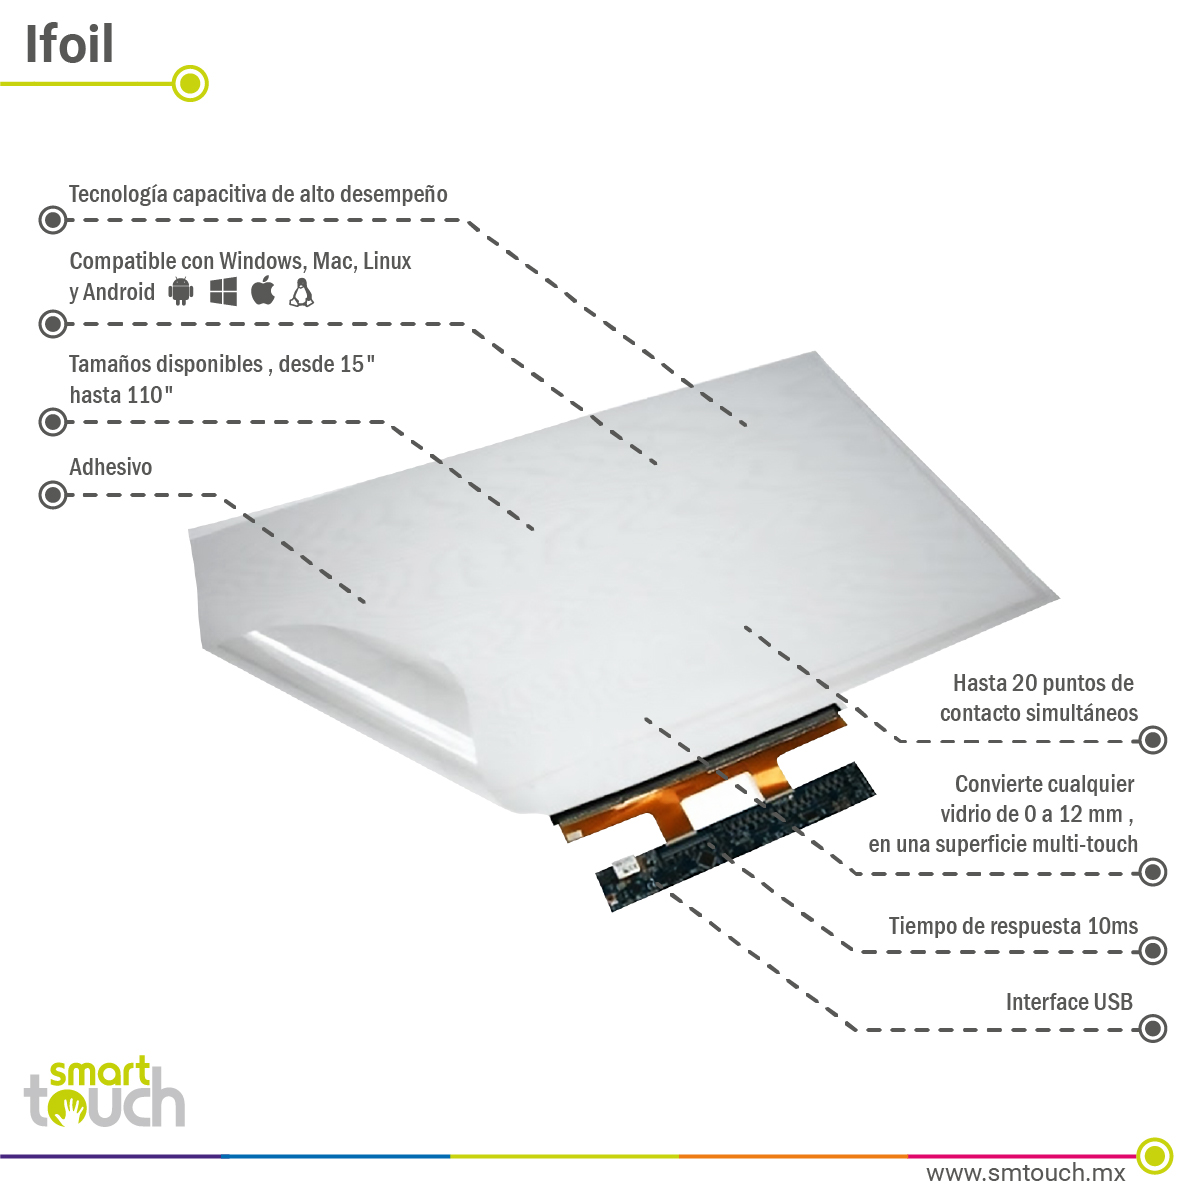 Ifoil